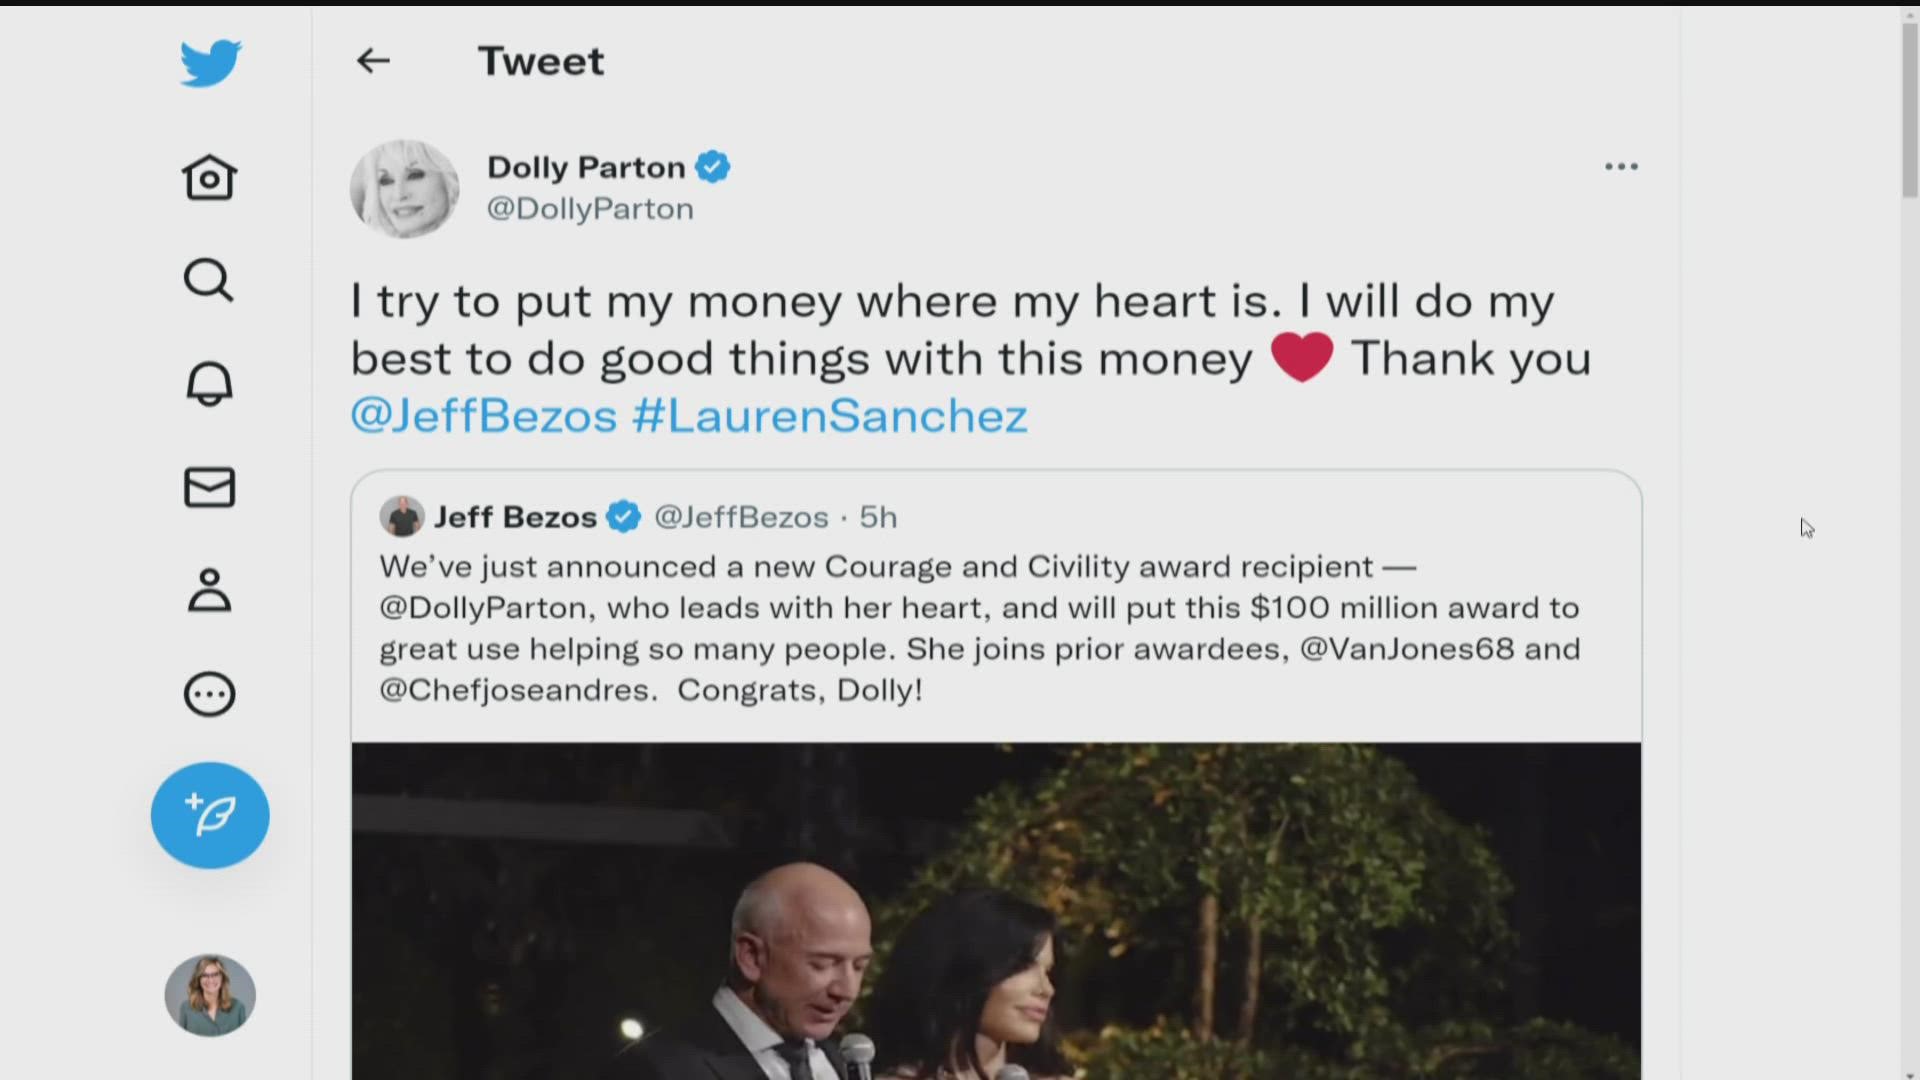 Jeff Bezos is giving Dolly Parton $100 million. Bezos and his partner Lauren Sanchez awarded this year's Courage and Civility Award to Dolly during a ceremony.